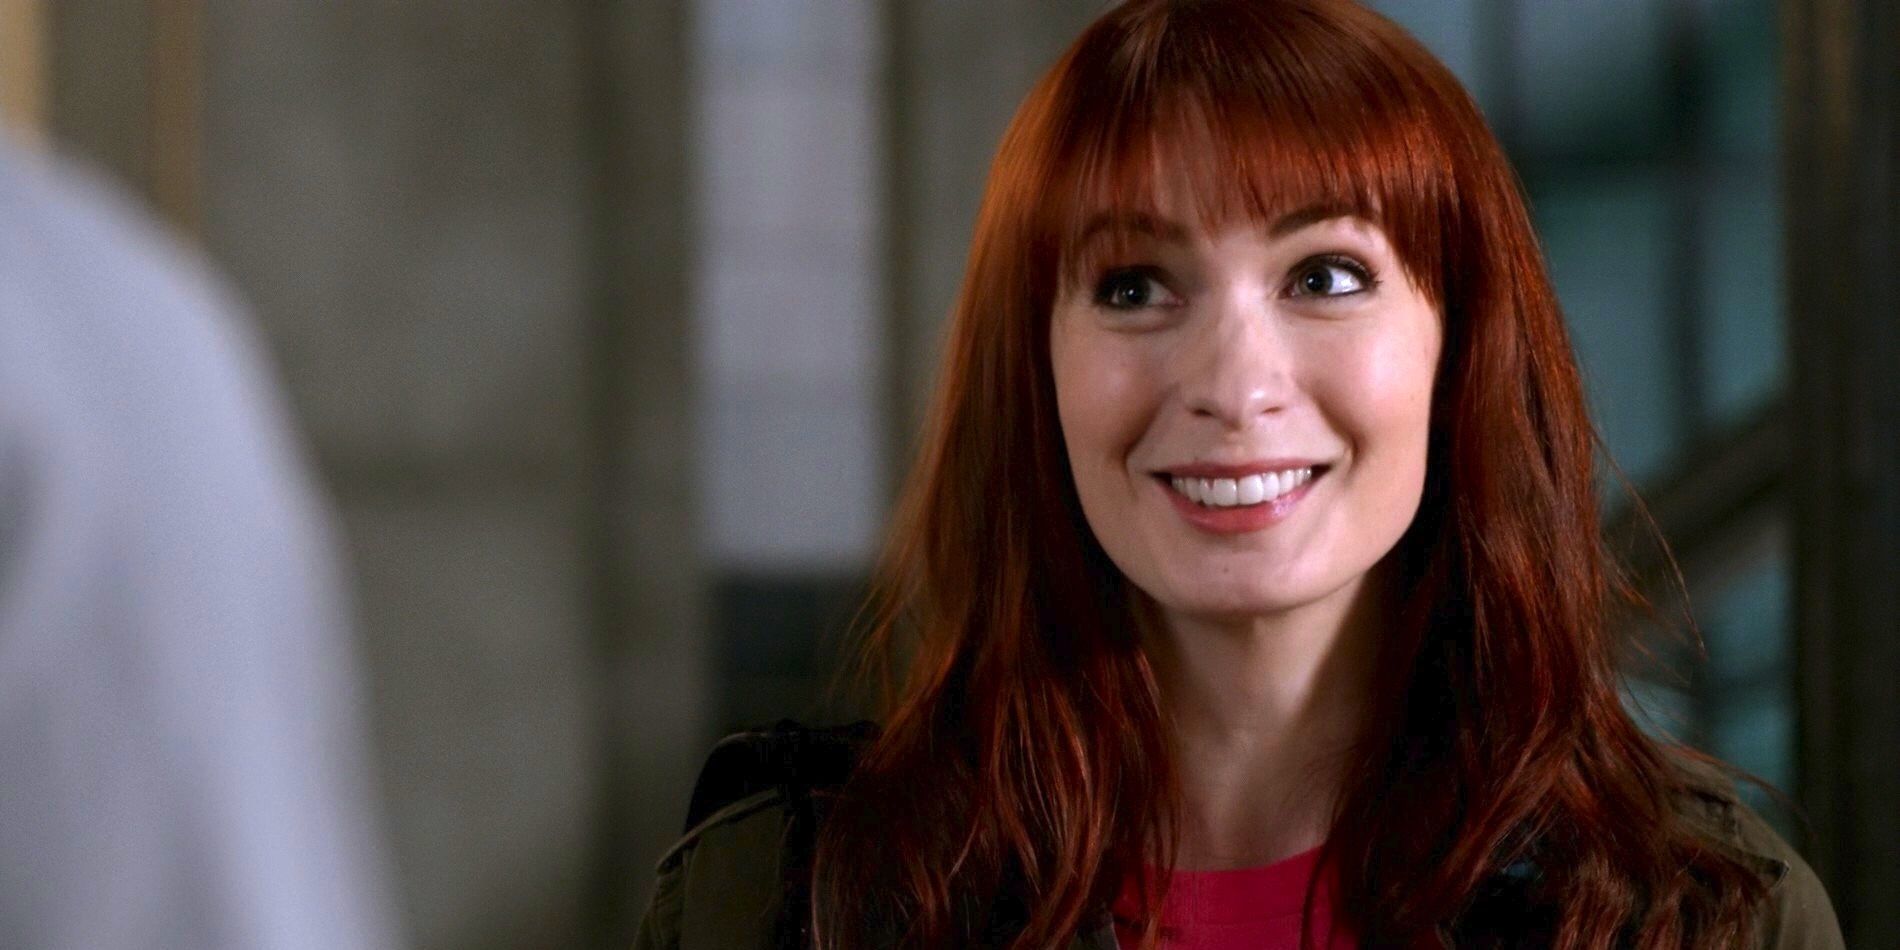 Felicia Day as Charlie on Supernatural